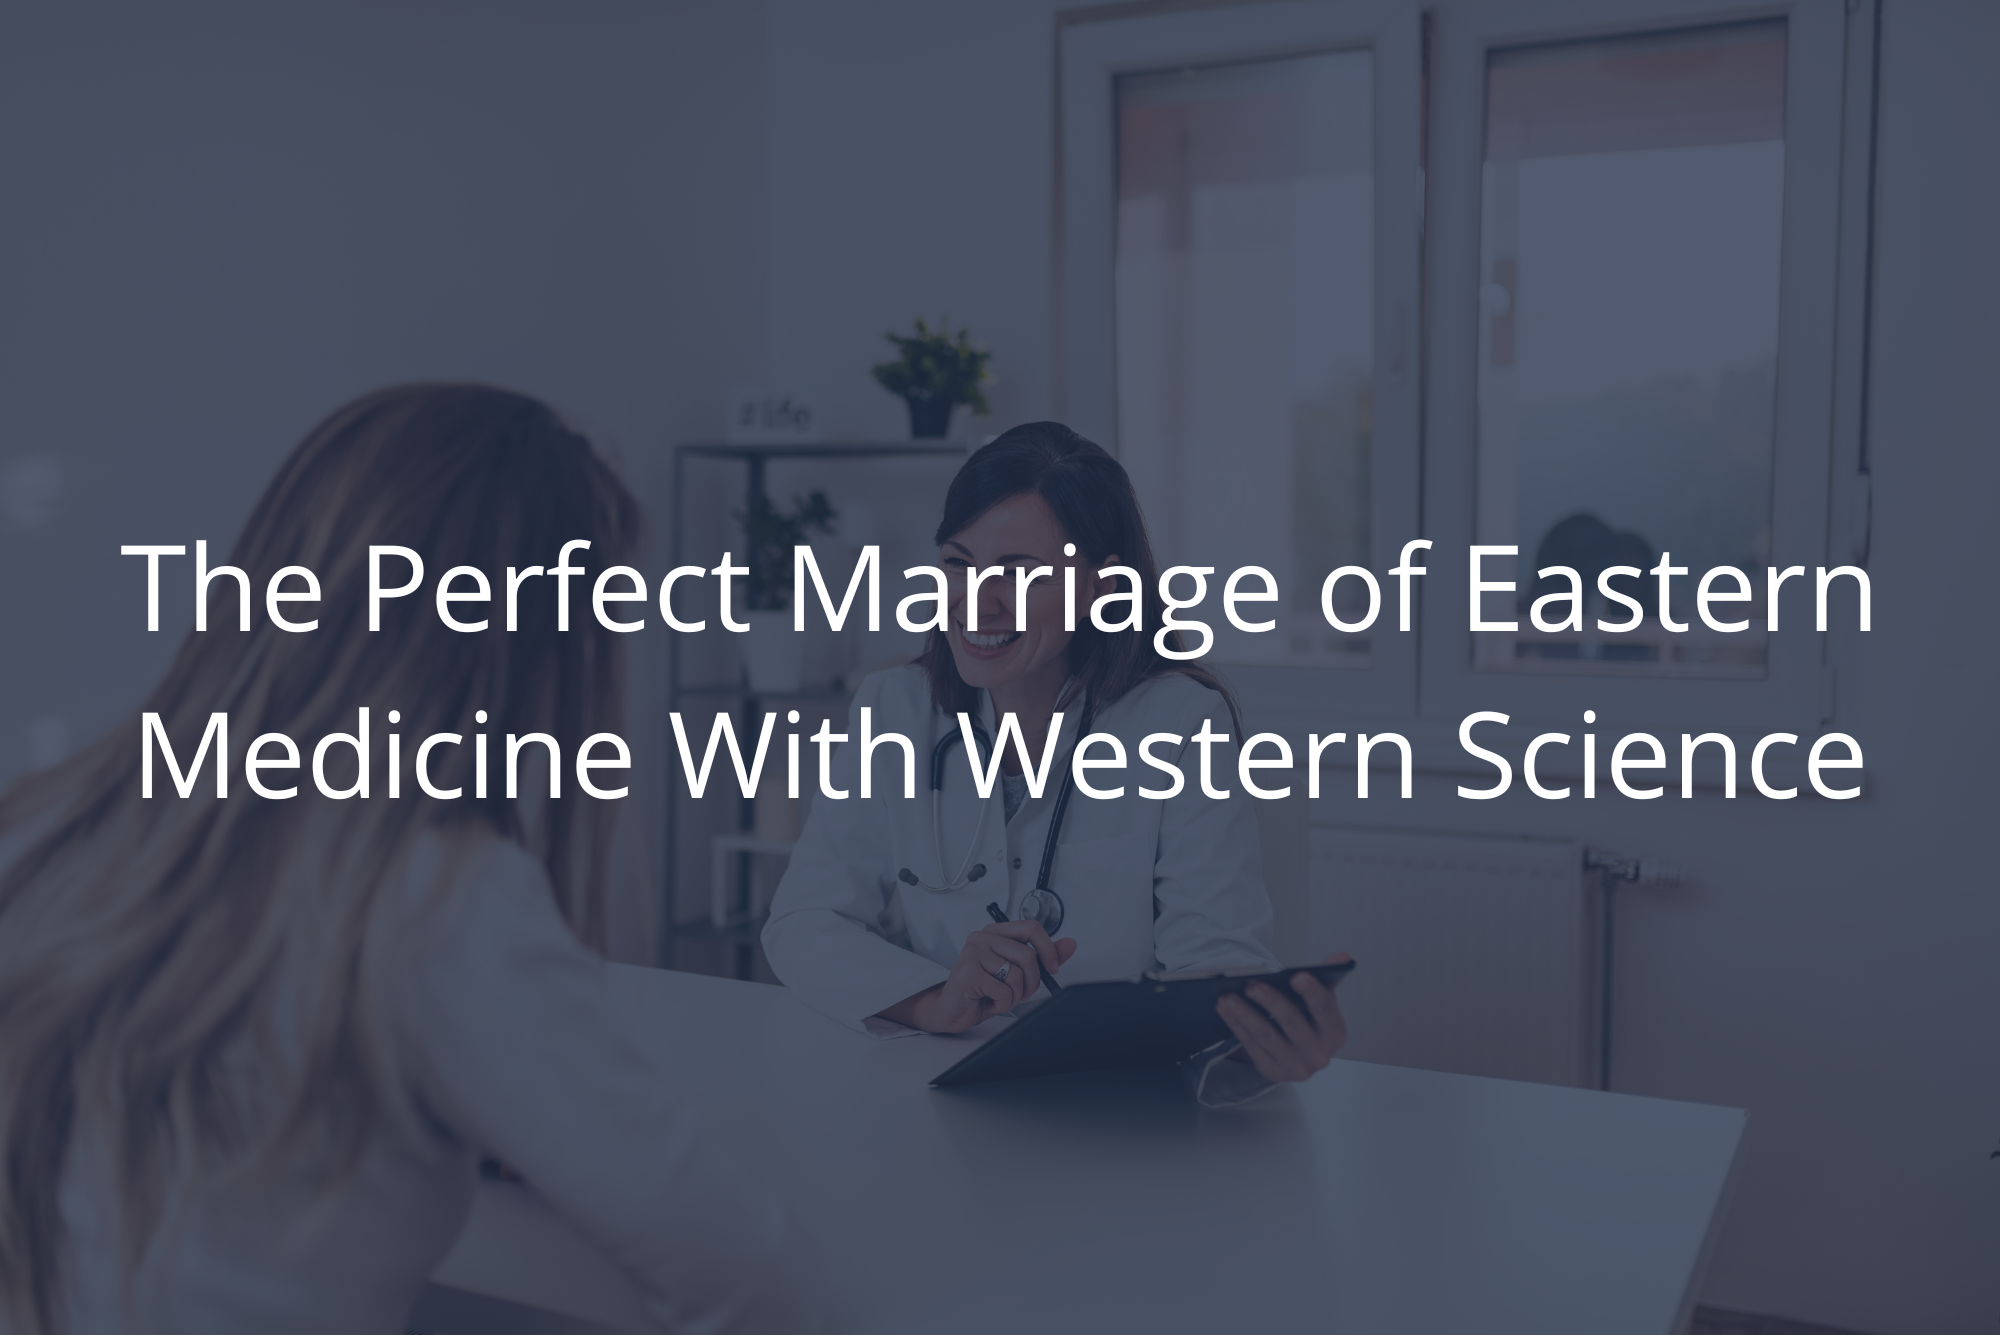 A doctor explains the difference between western medicine vs eastern medicine, and how together they form functional medicine.